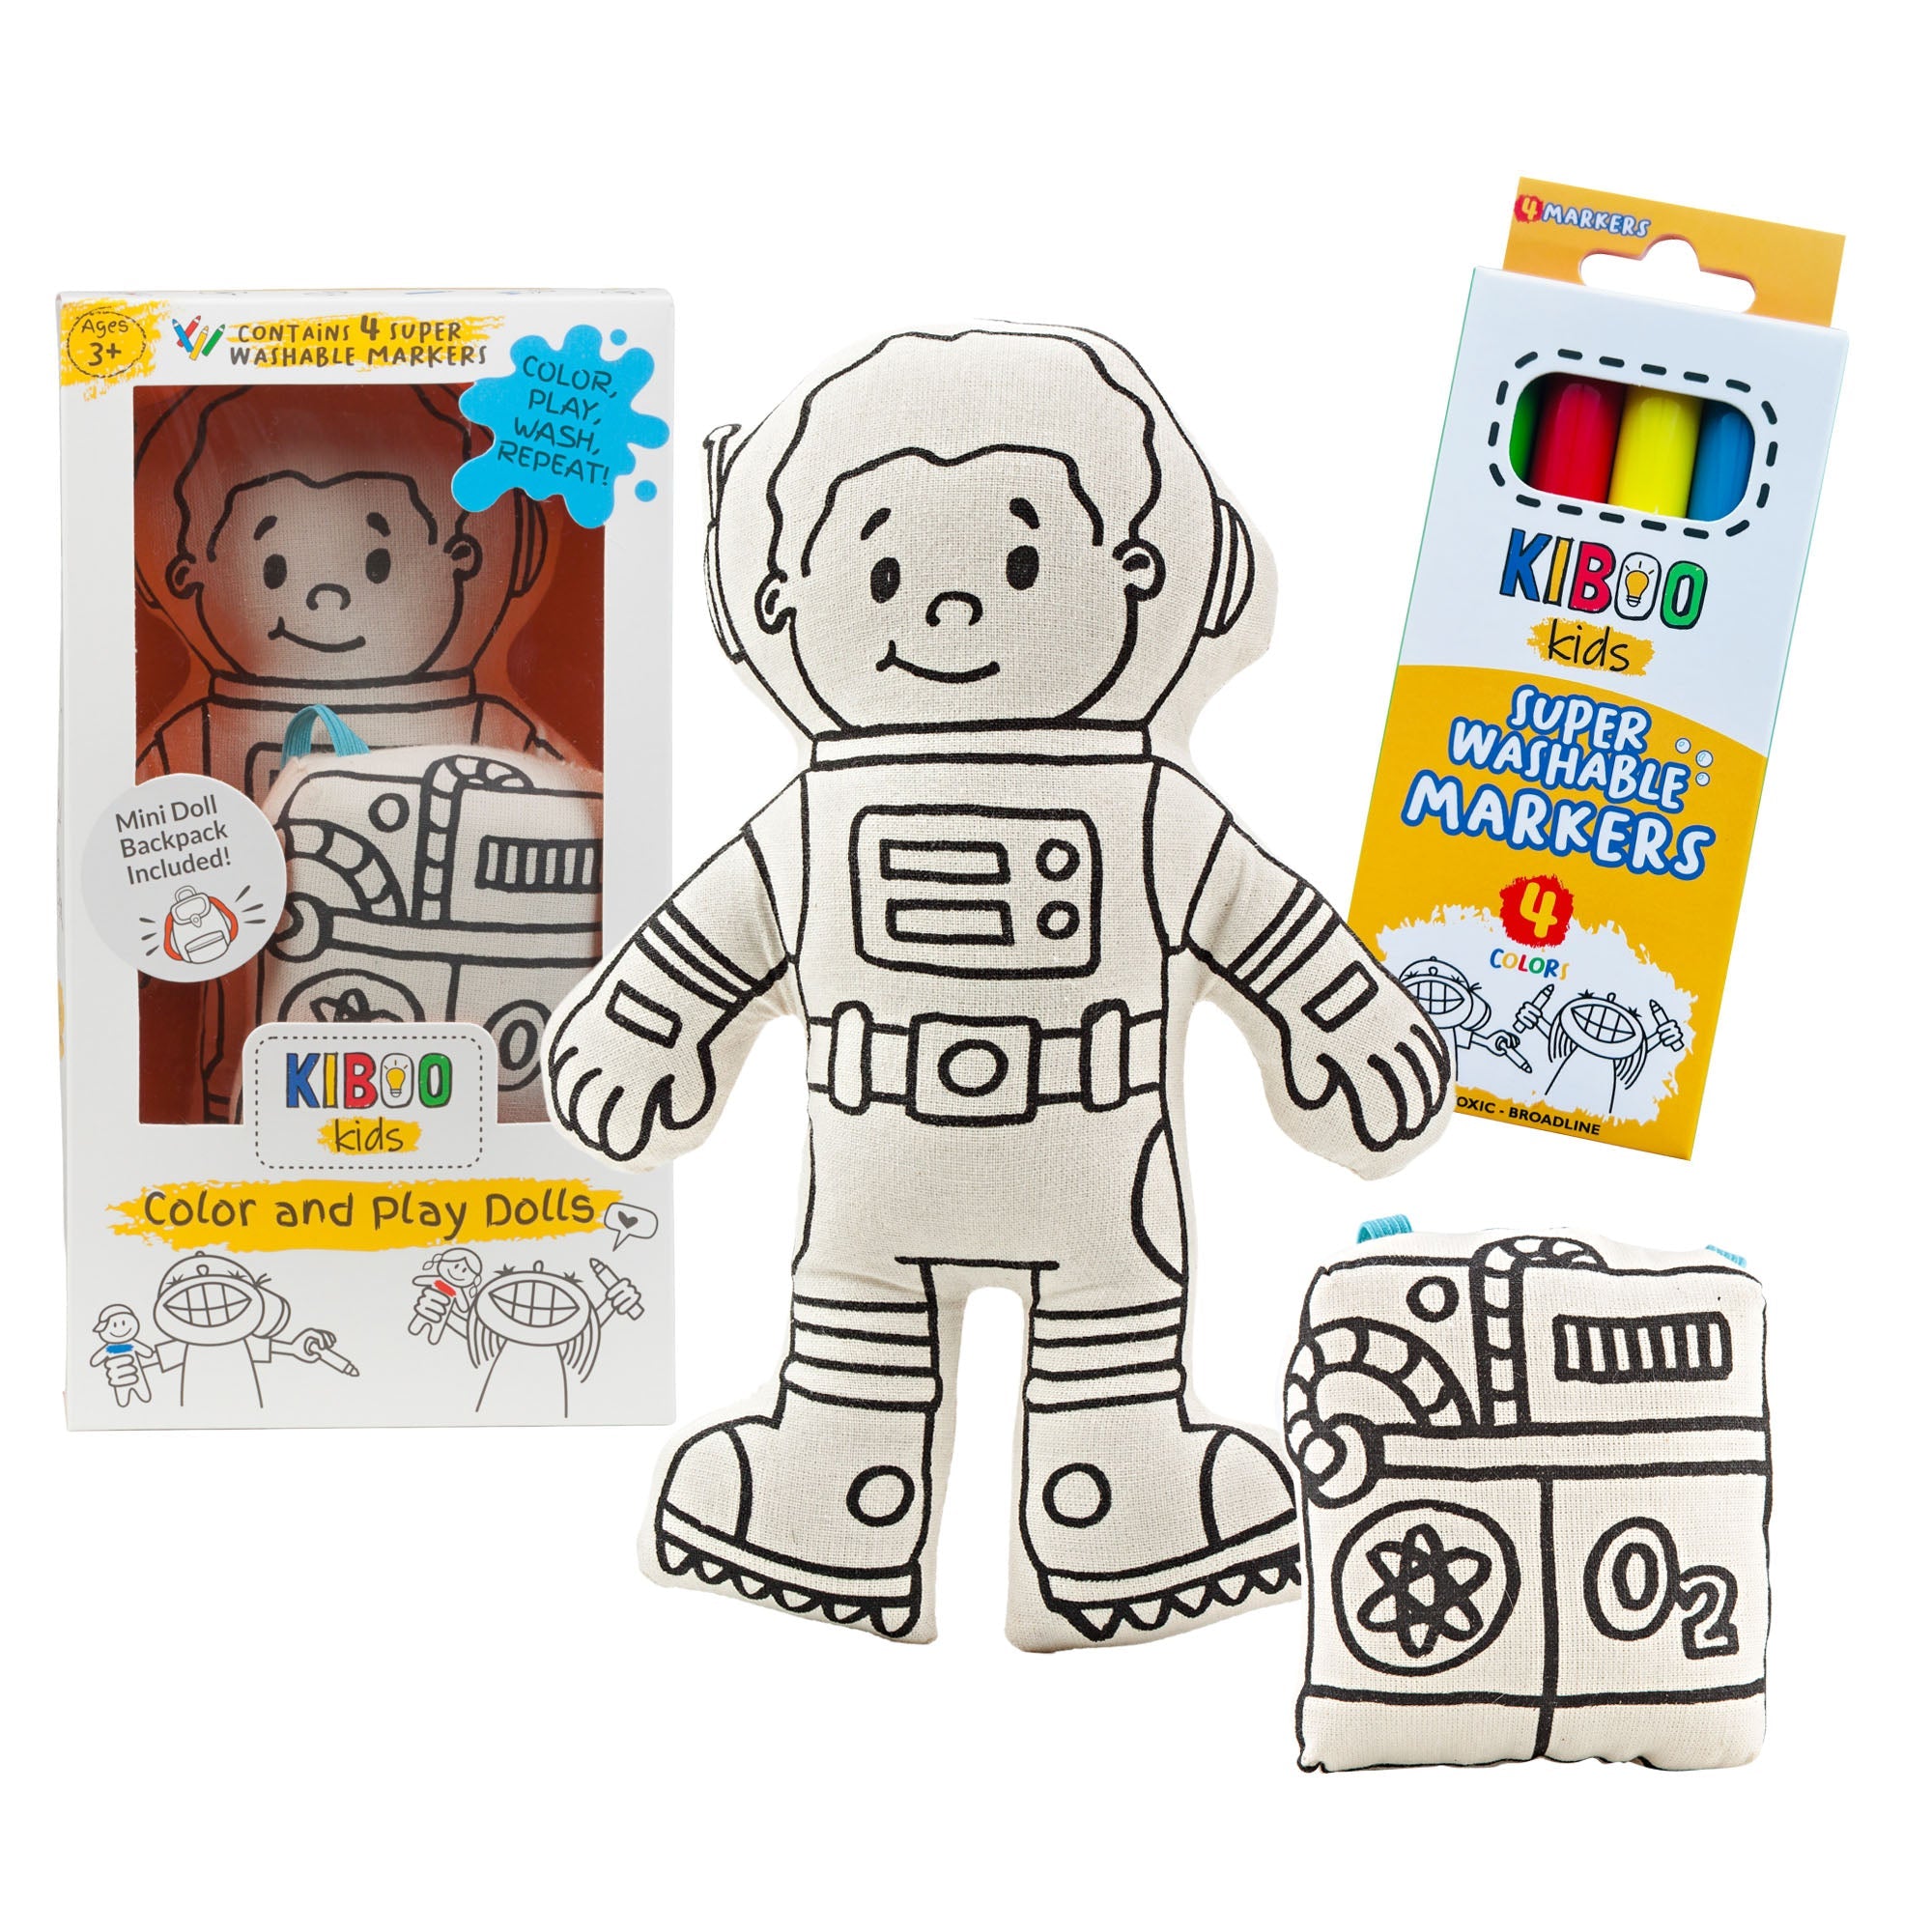 Kiboo Kids Space Explorer: Boy Astronaut Doll With Mini Space Pack - Educational And Imaginative Play Toy